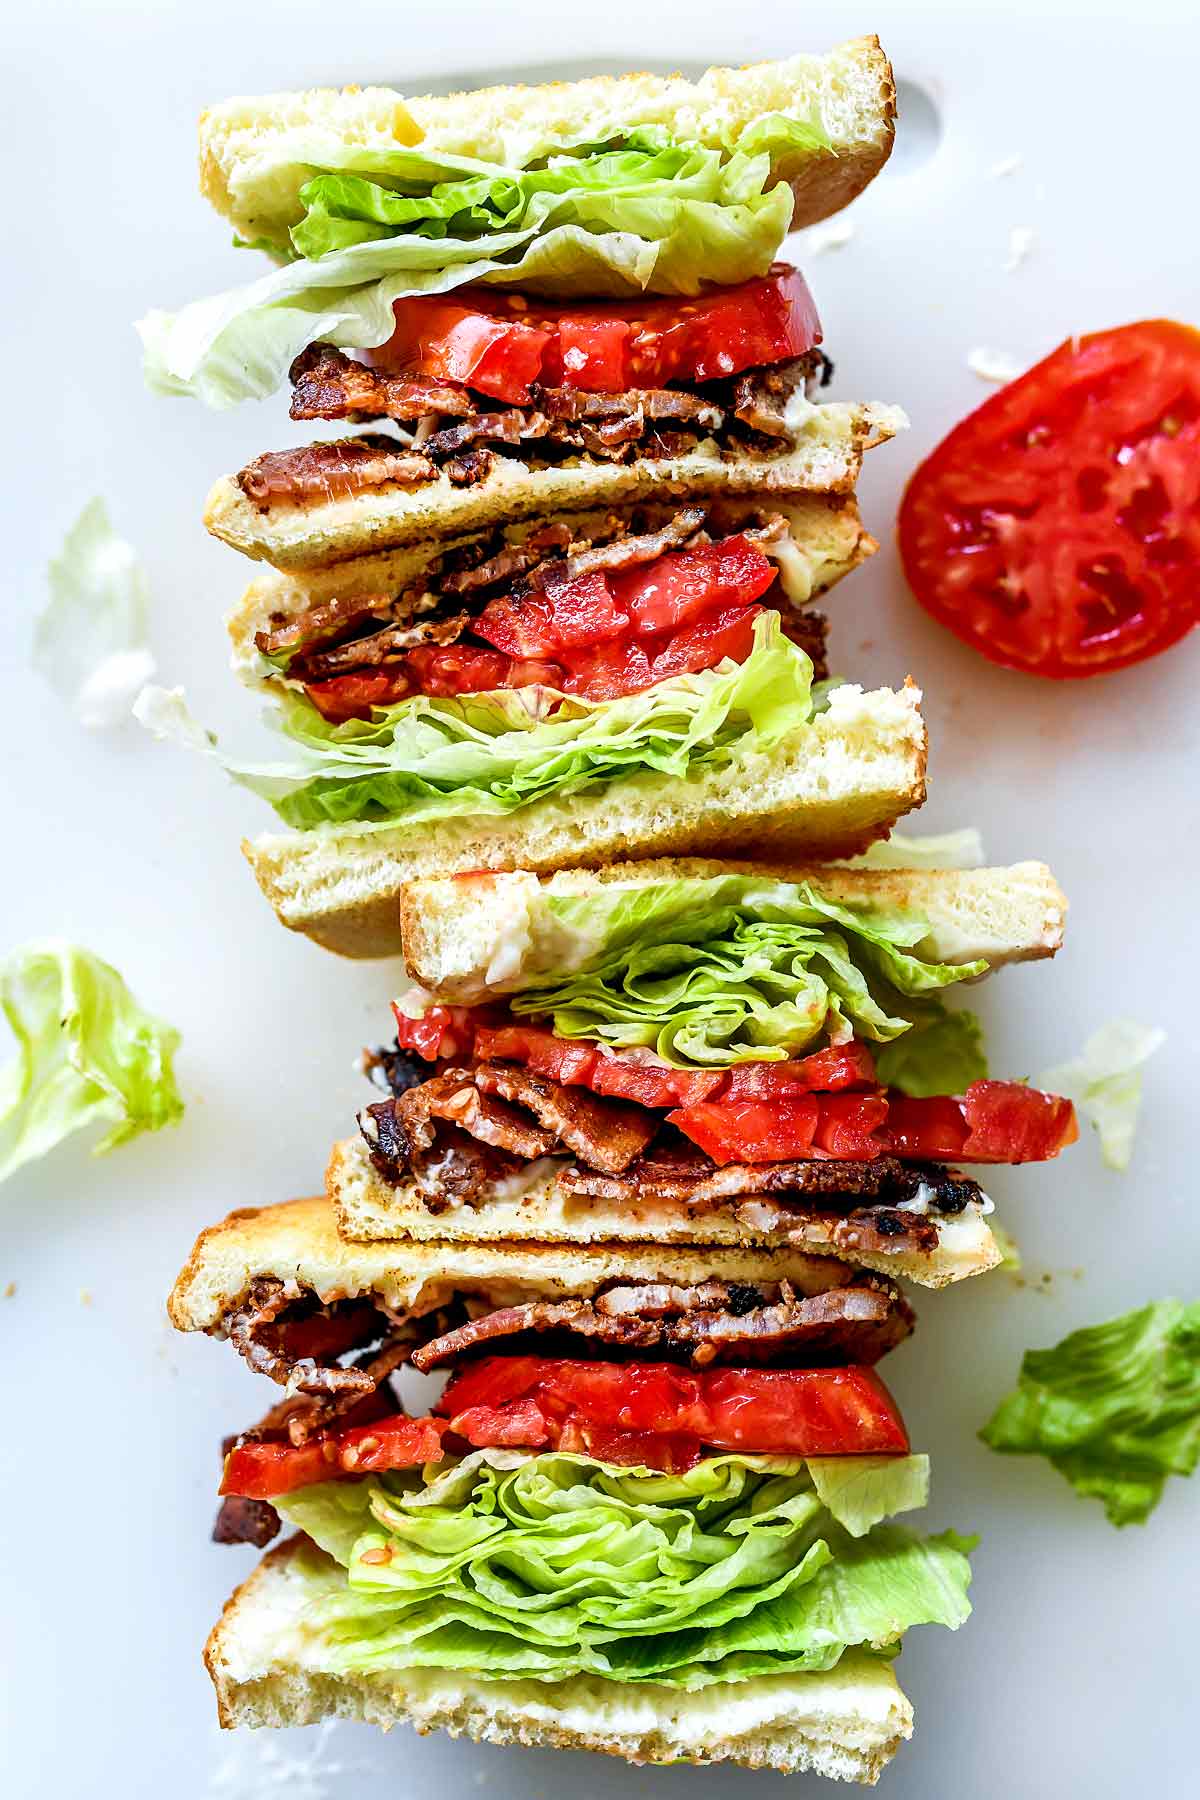 The Best BLT (Bacon, Lettuce, and Tomato) Sandwich Recipe